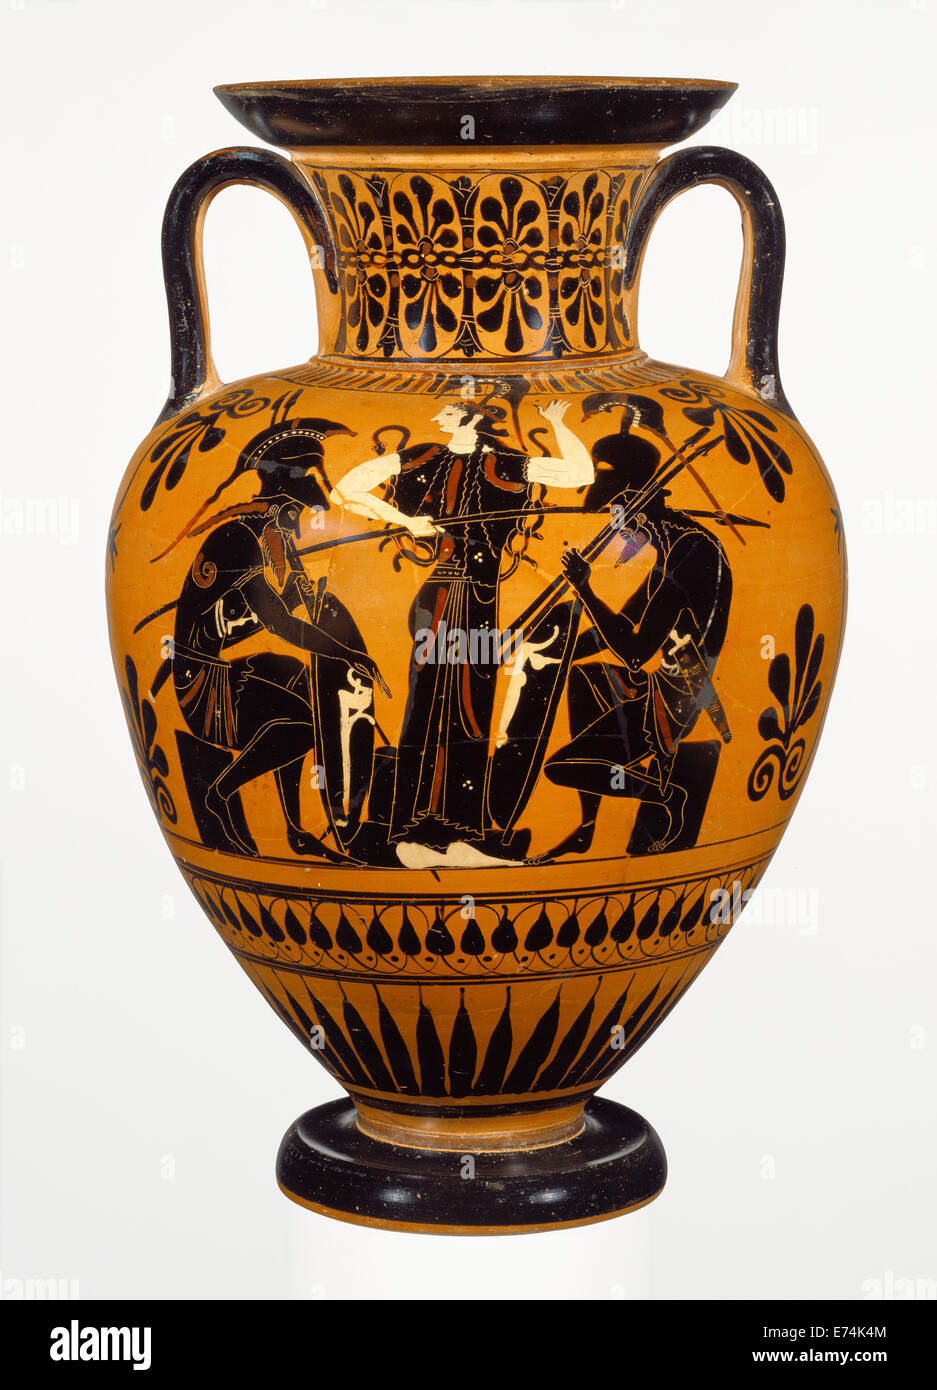 Attic Black-Figure Neck Amphora; Attributed to Leagros Group, Greek (Attic), active 525 - 500 B.C.; Athens, Greece, Europe Stock Photo